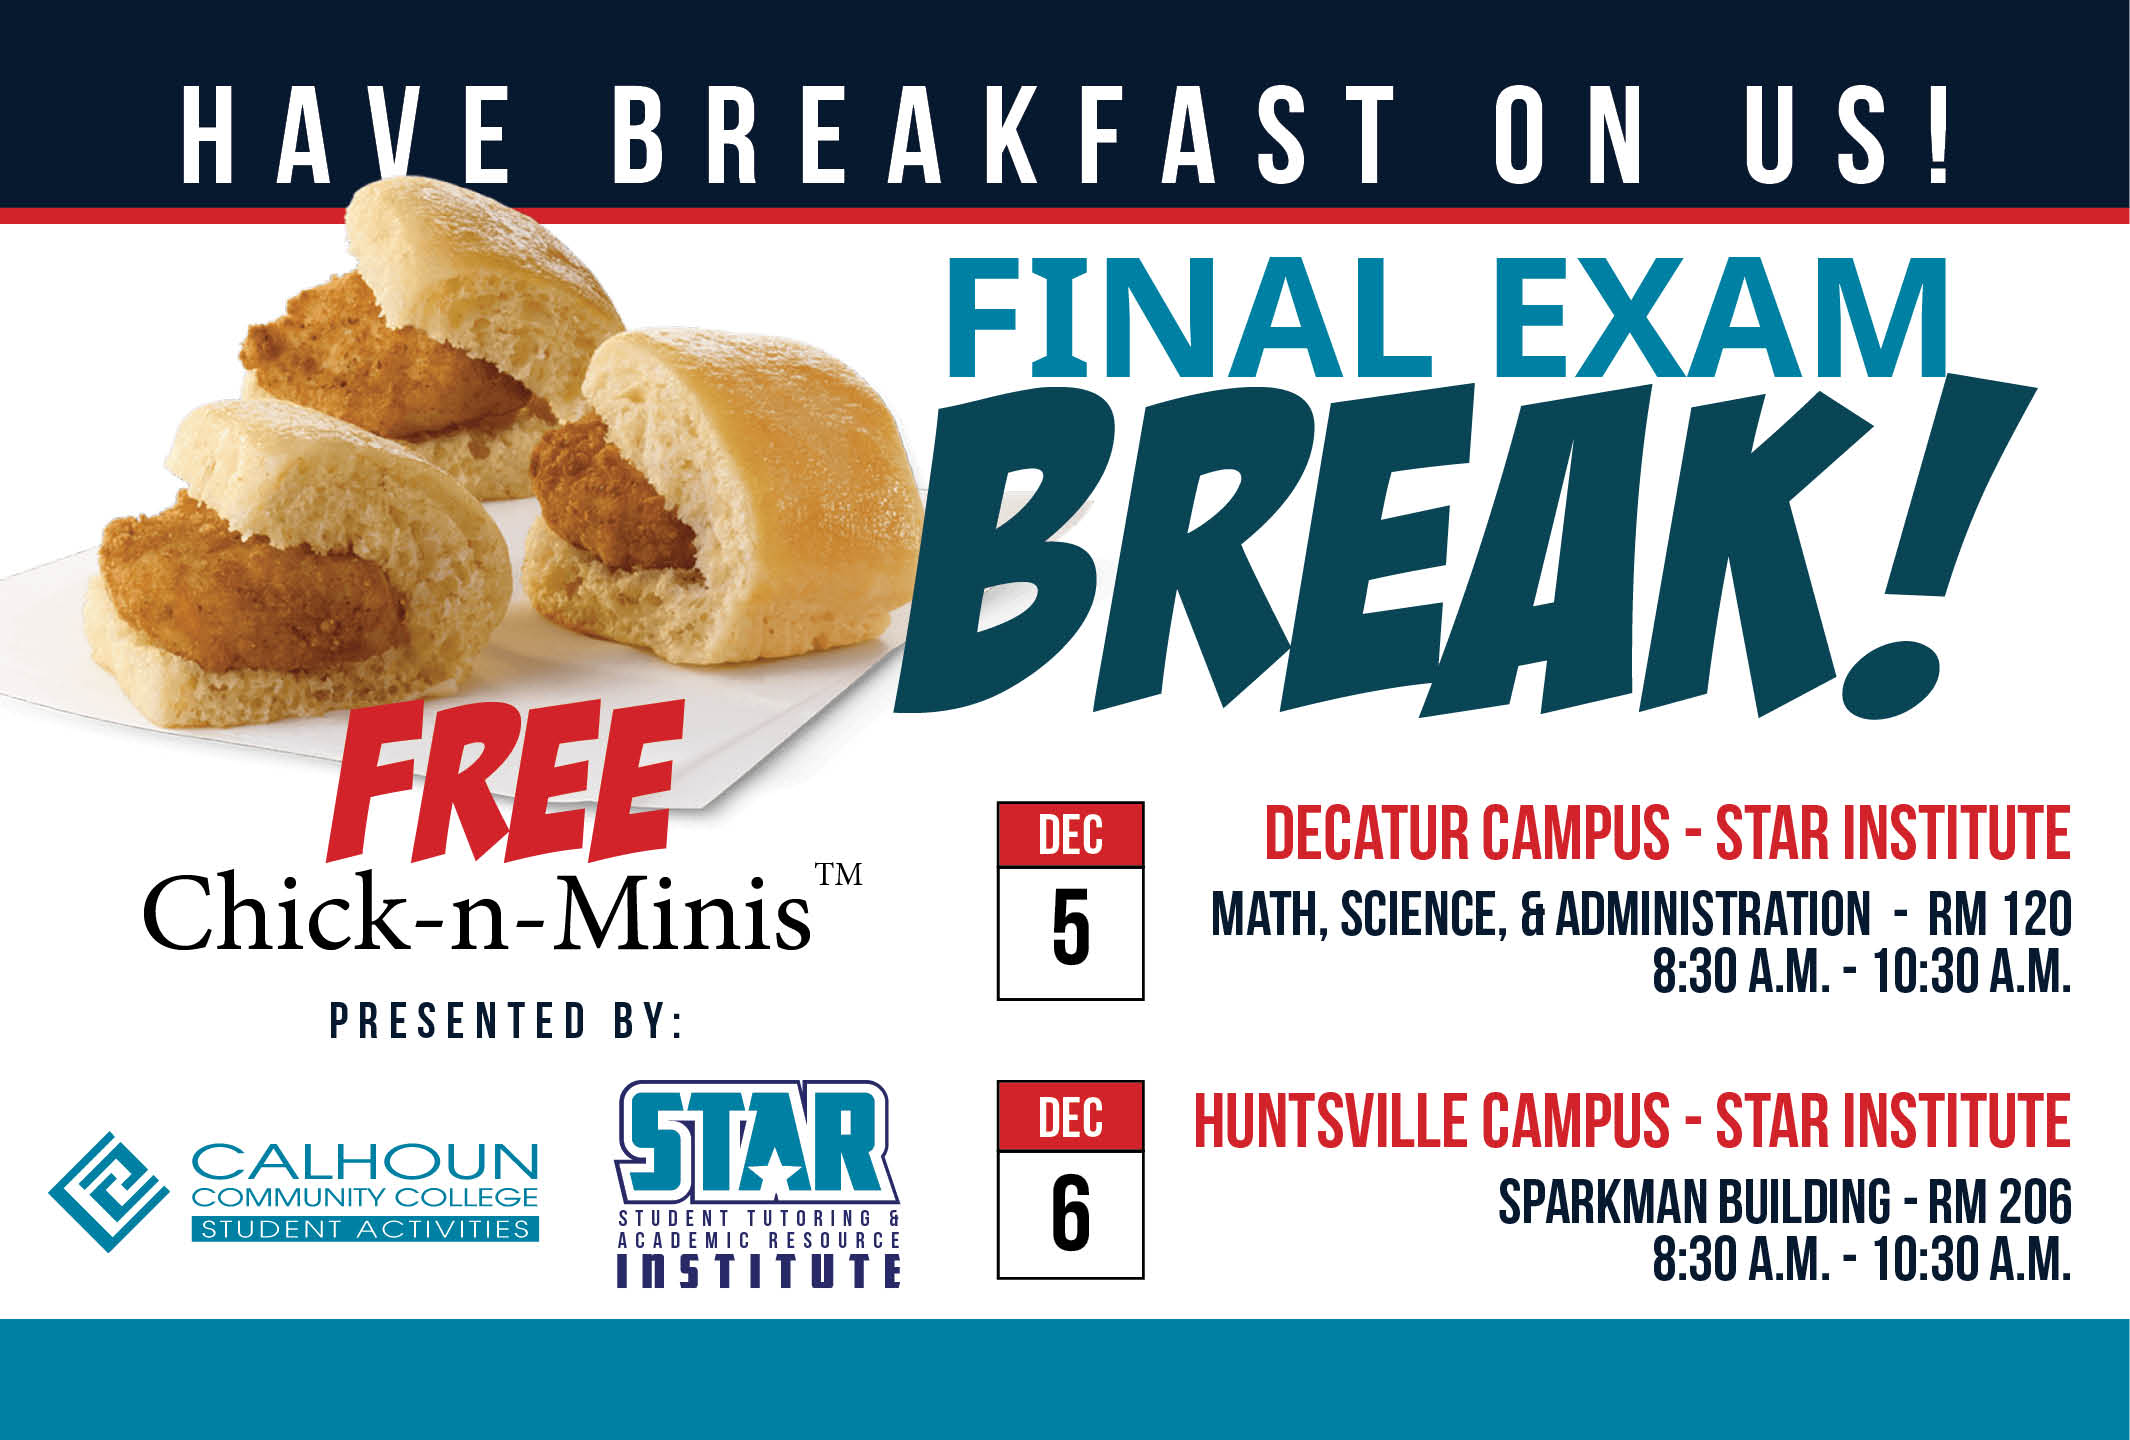 Have Breakfast on us! Final exam break! Present by Student Activities and STAR Institute.